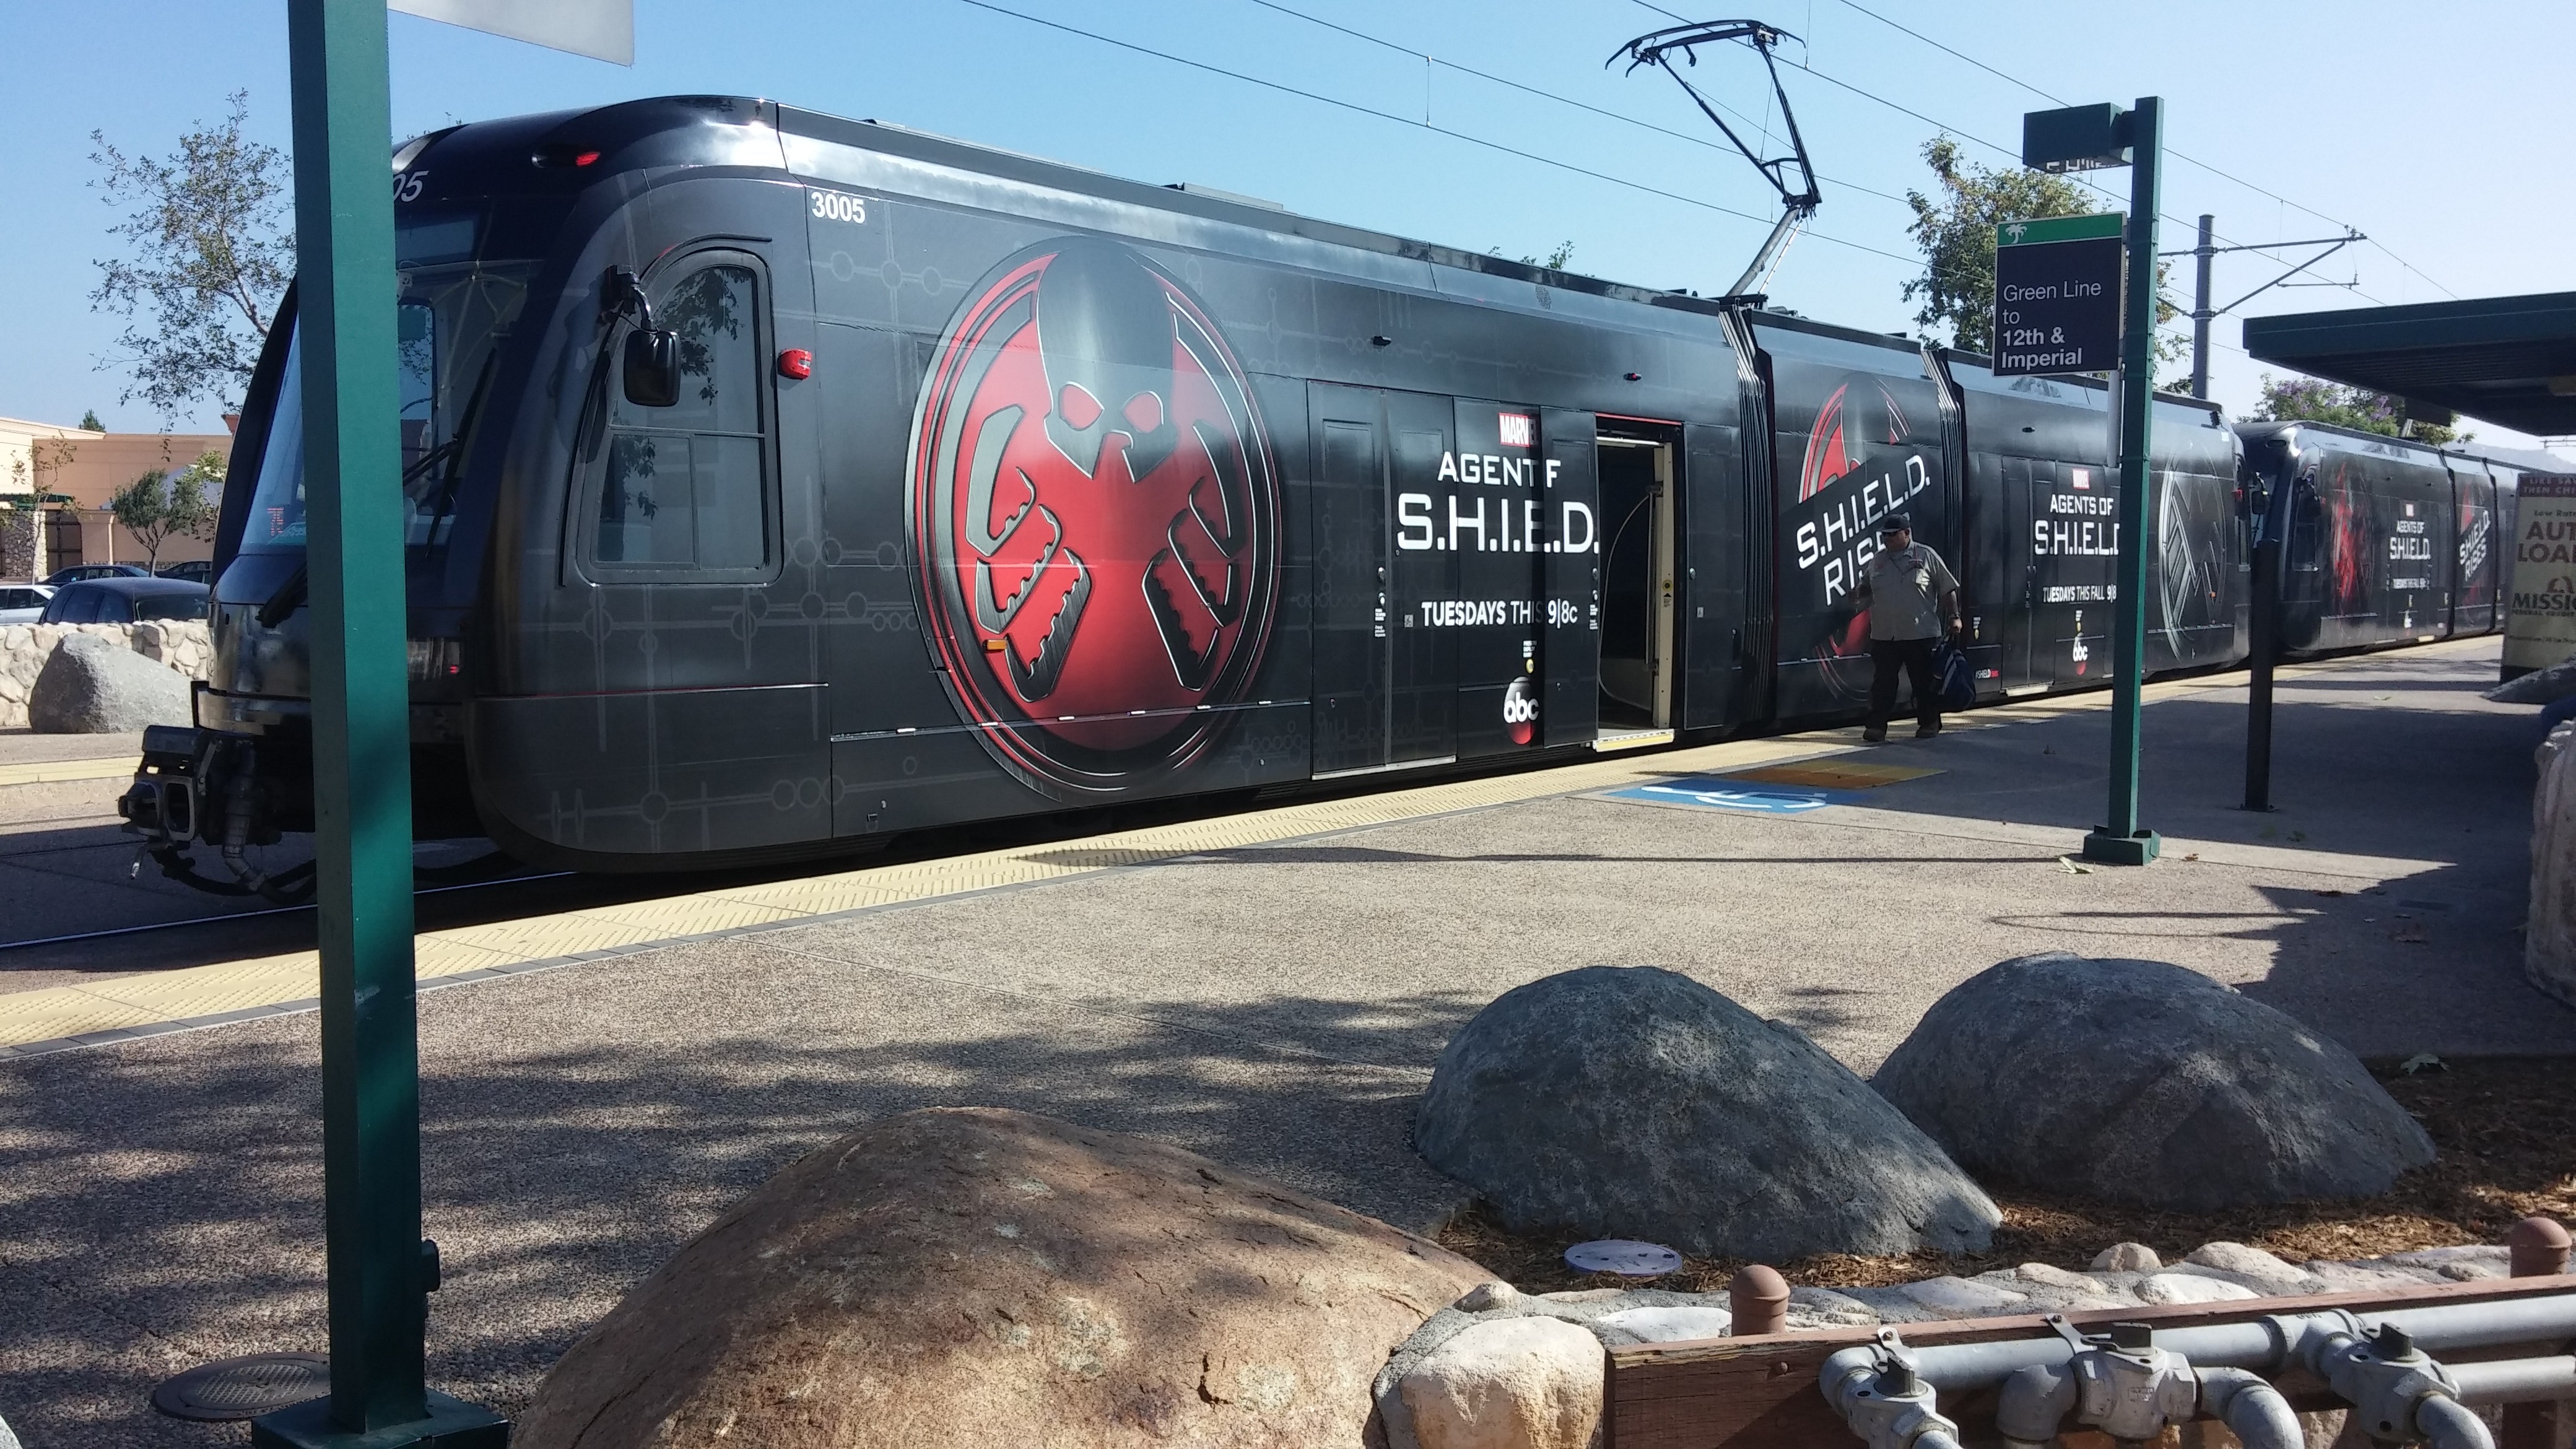 Agents of S.H.I.E.L.D. is the latest Trolley wrap for SDCC 2014